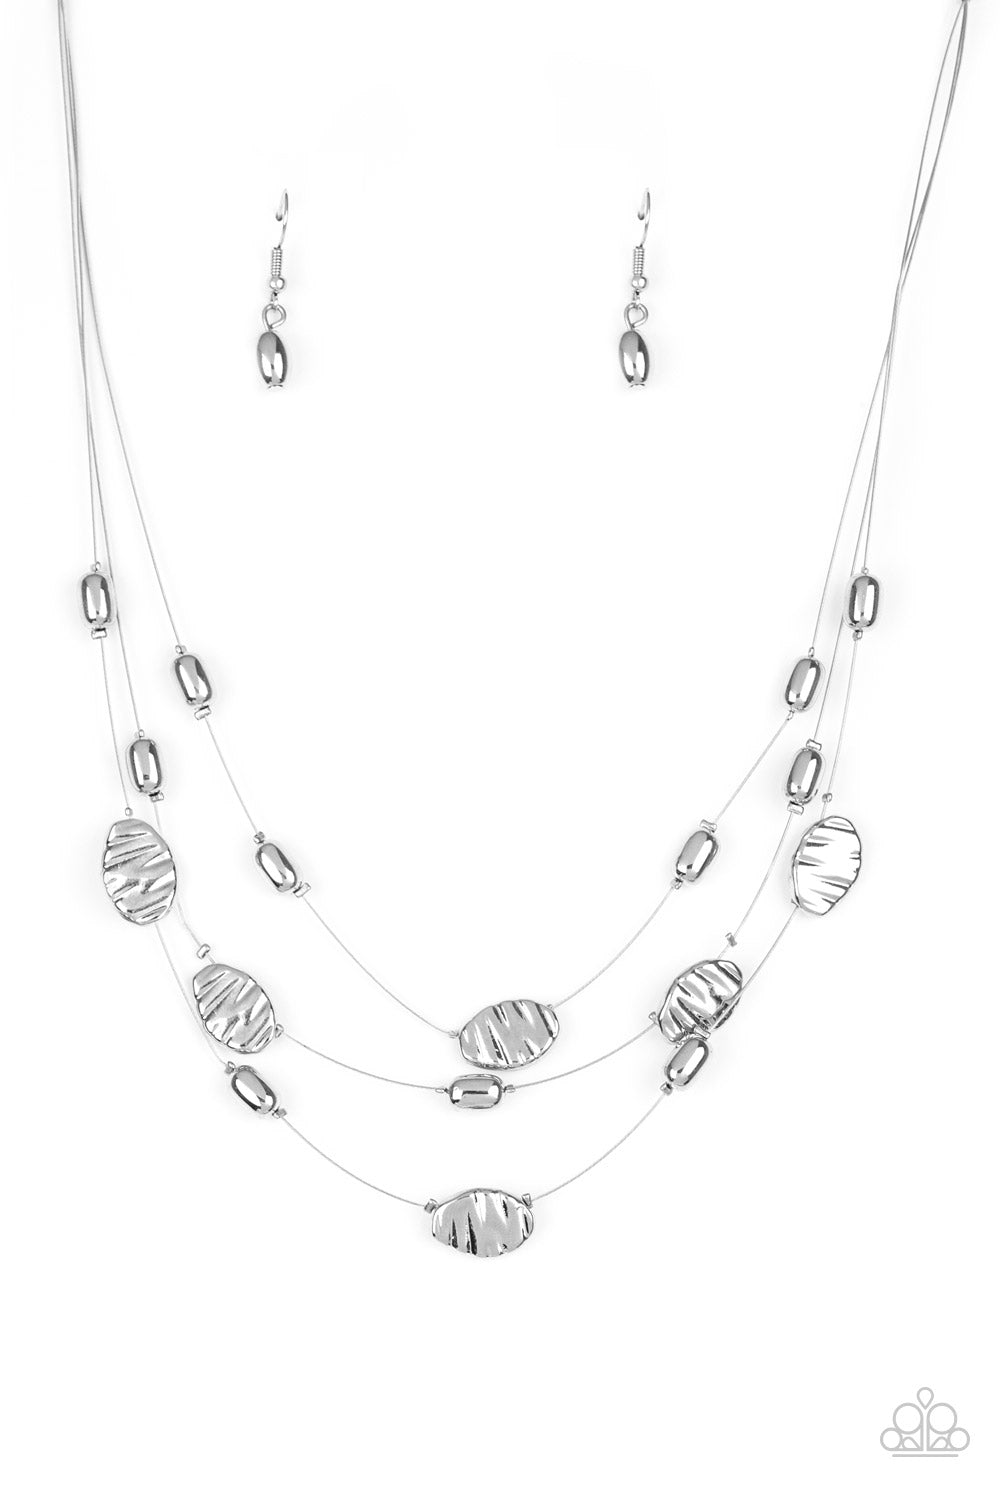 A23 - Top Zen, Silver Necklace by Paparazzi Accessories on Fancy5Fashion.com